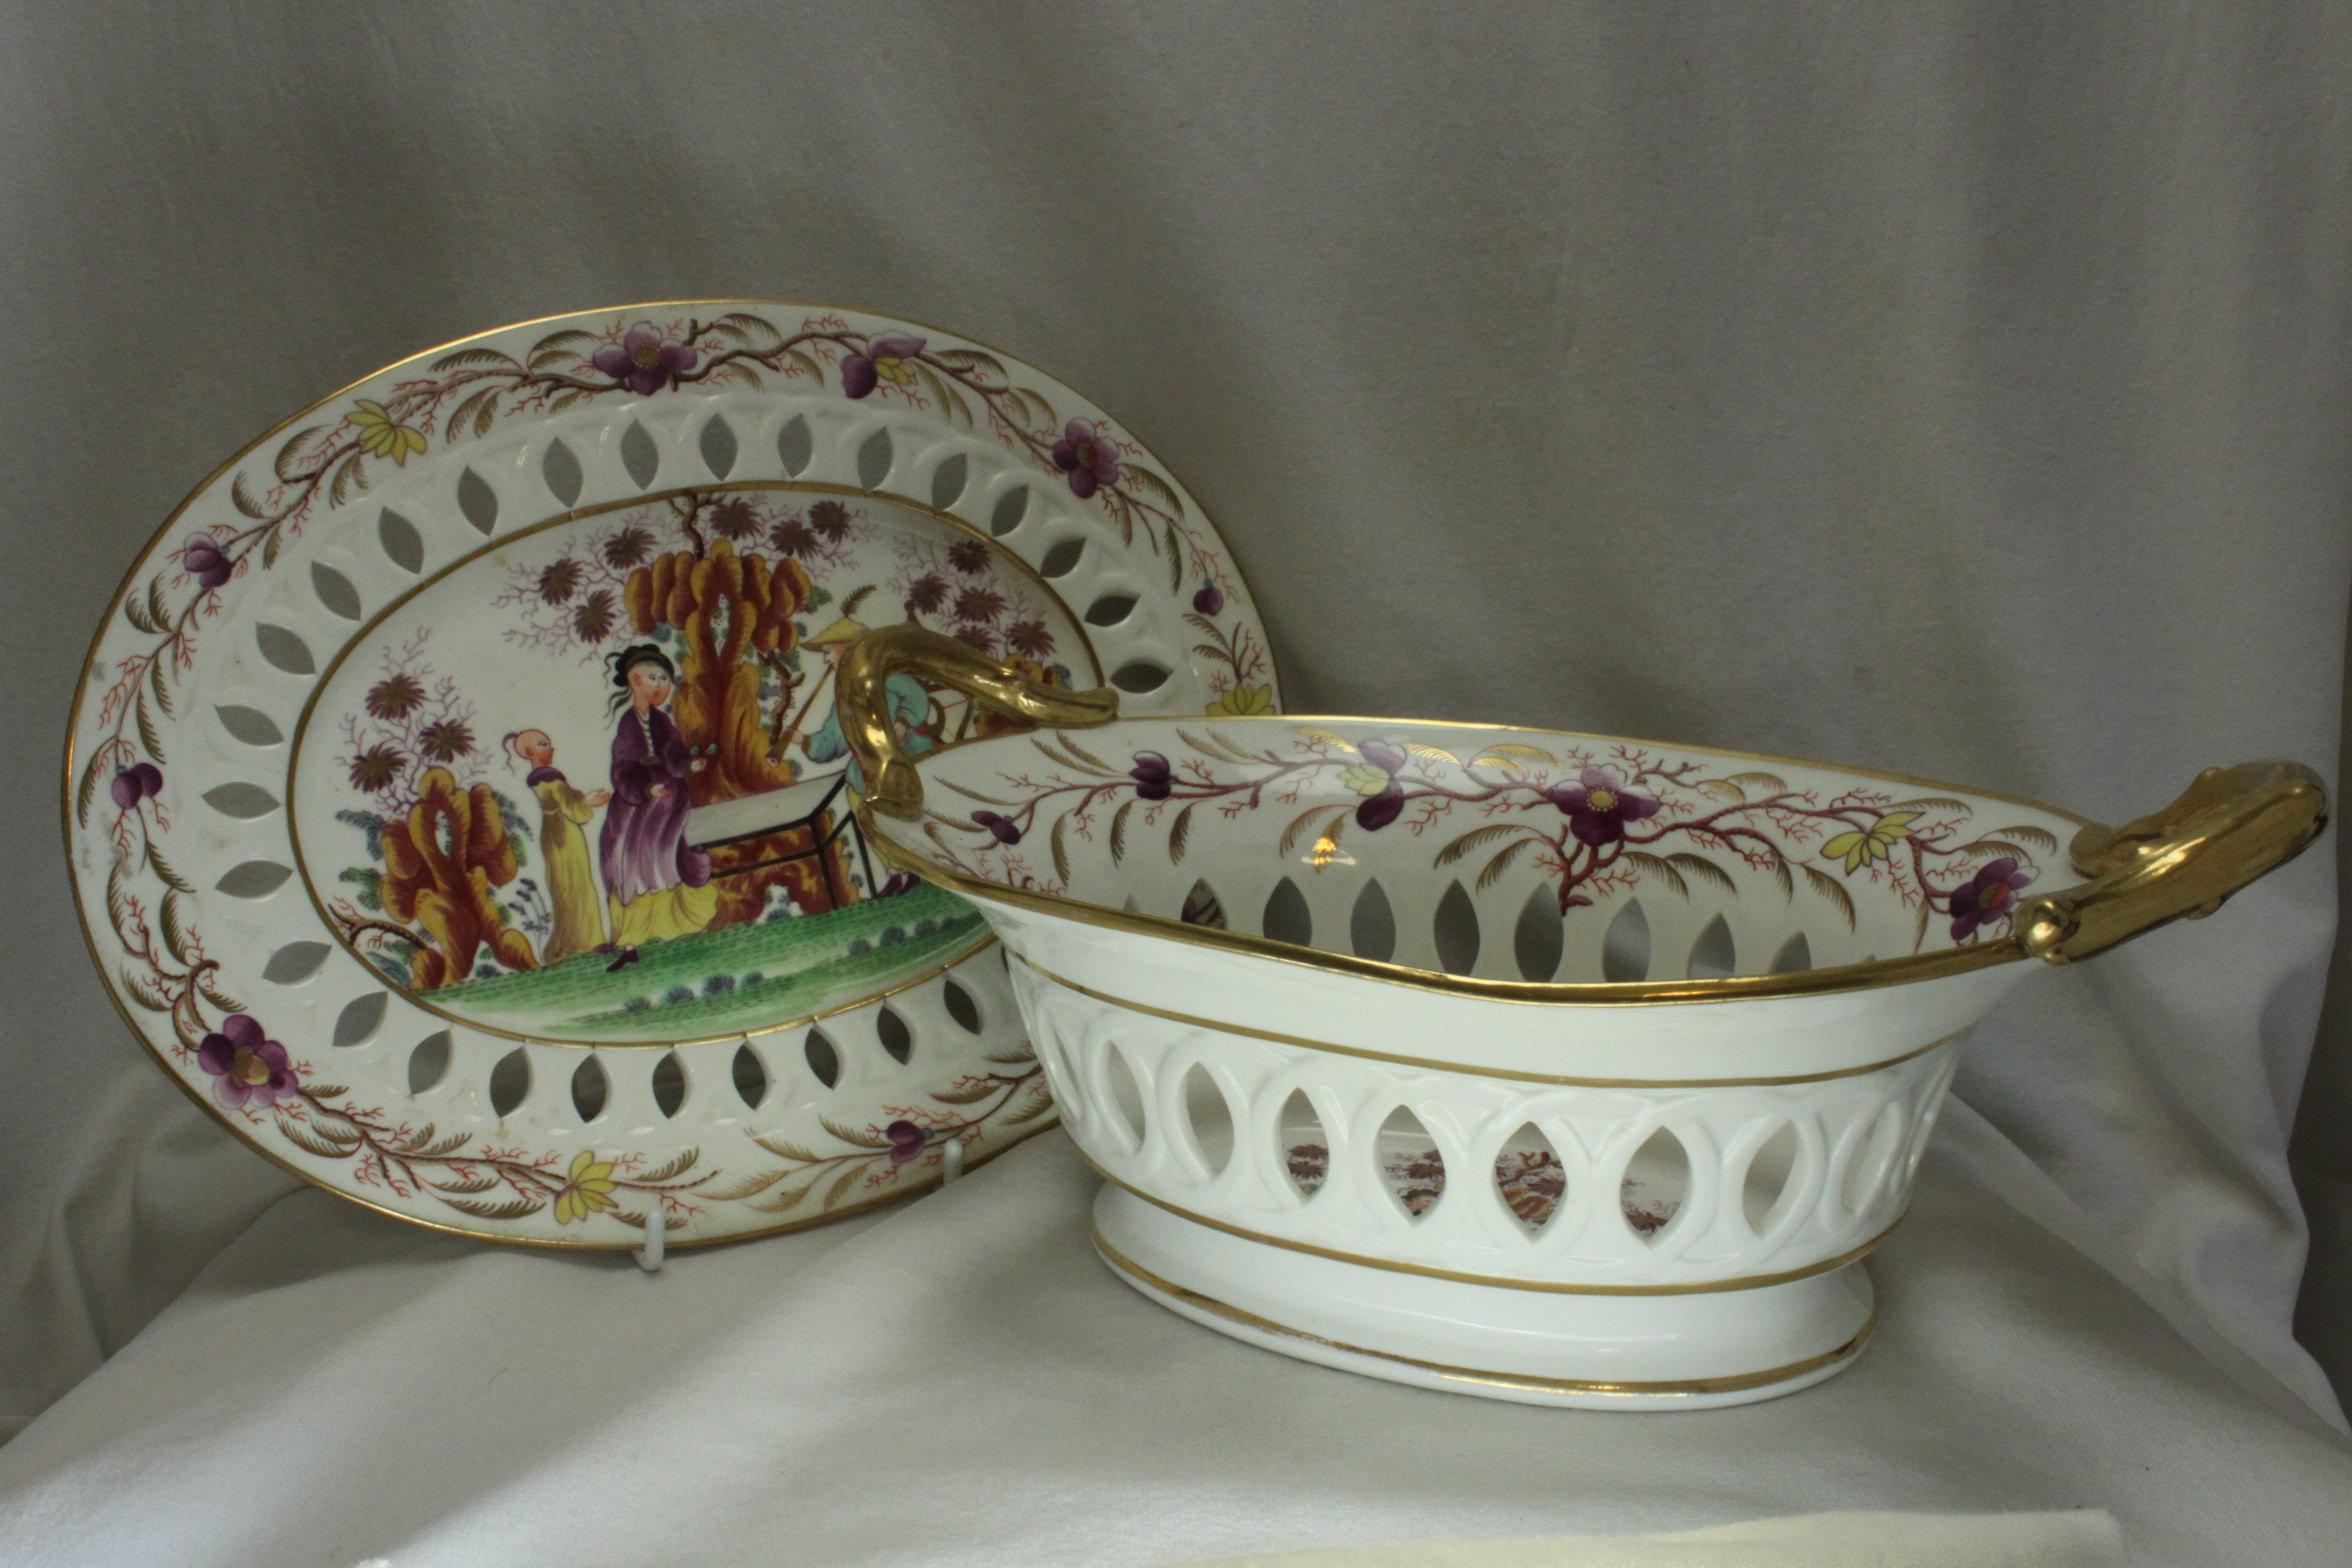 This bone china dessert basket and stand by Davenport is decorated with their hand painted 